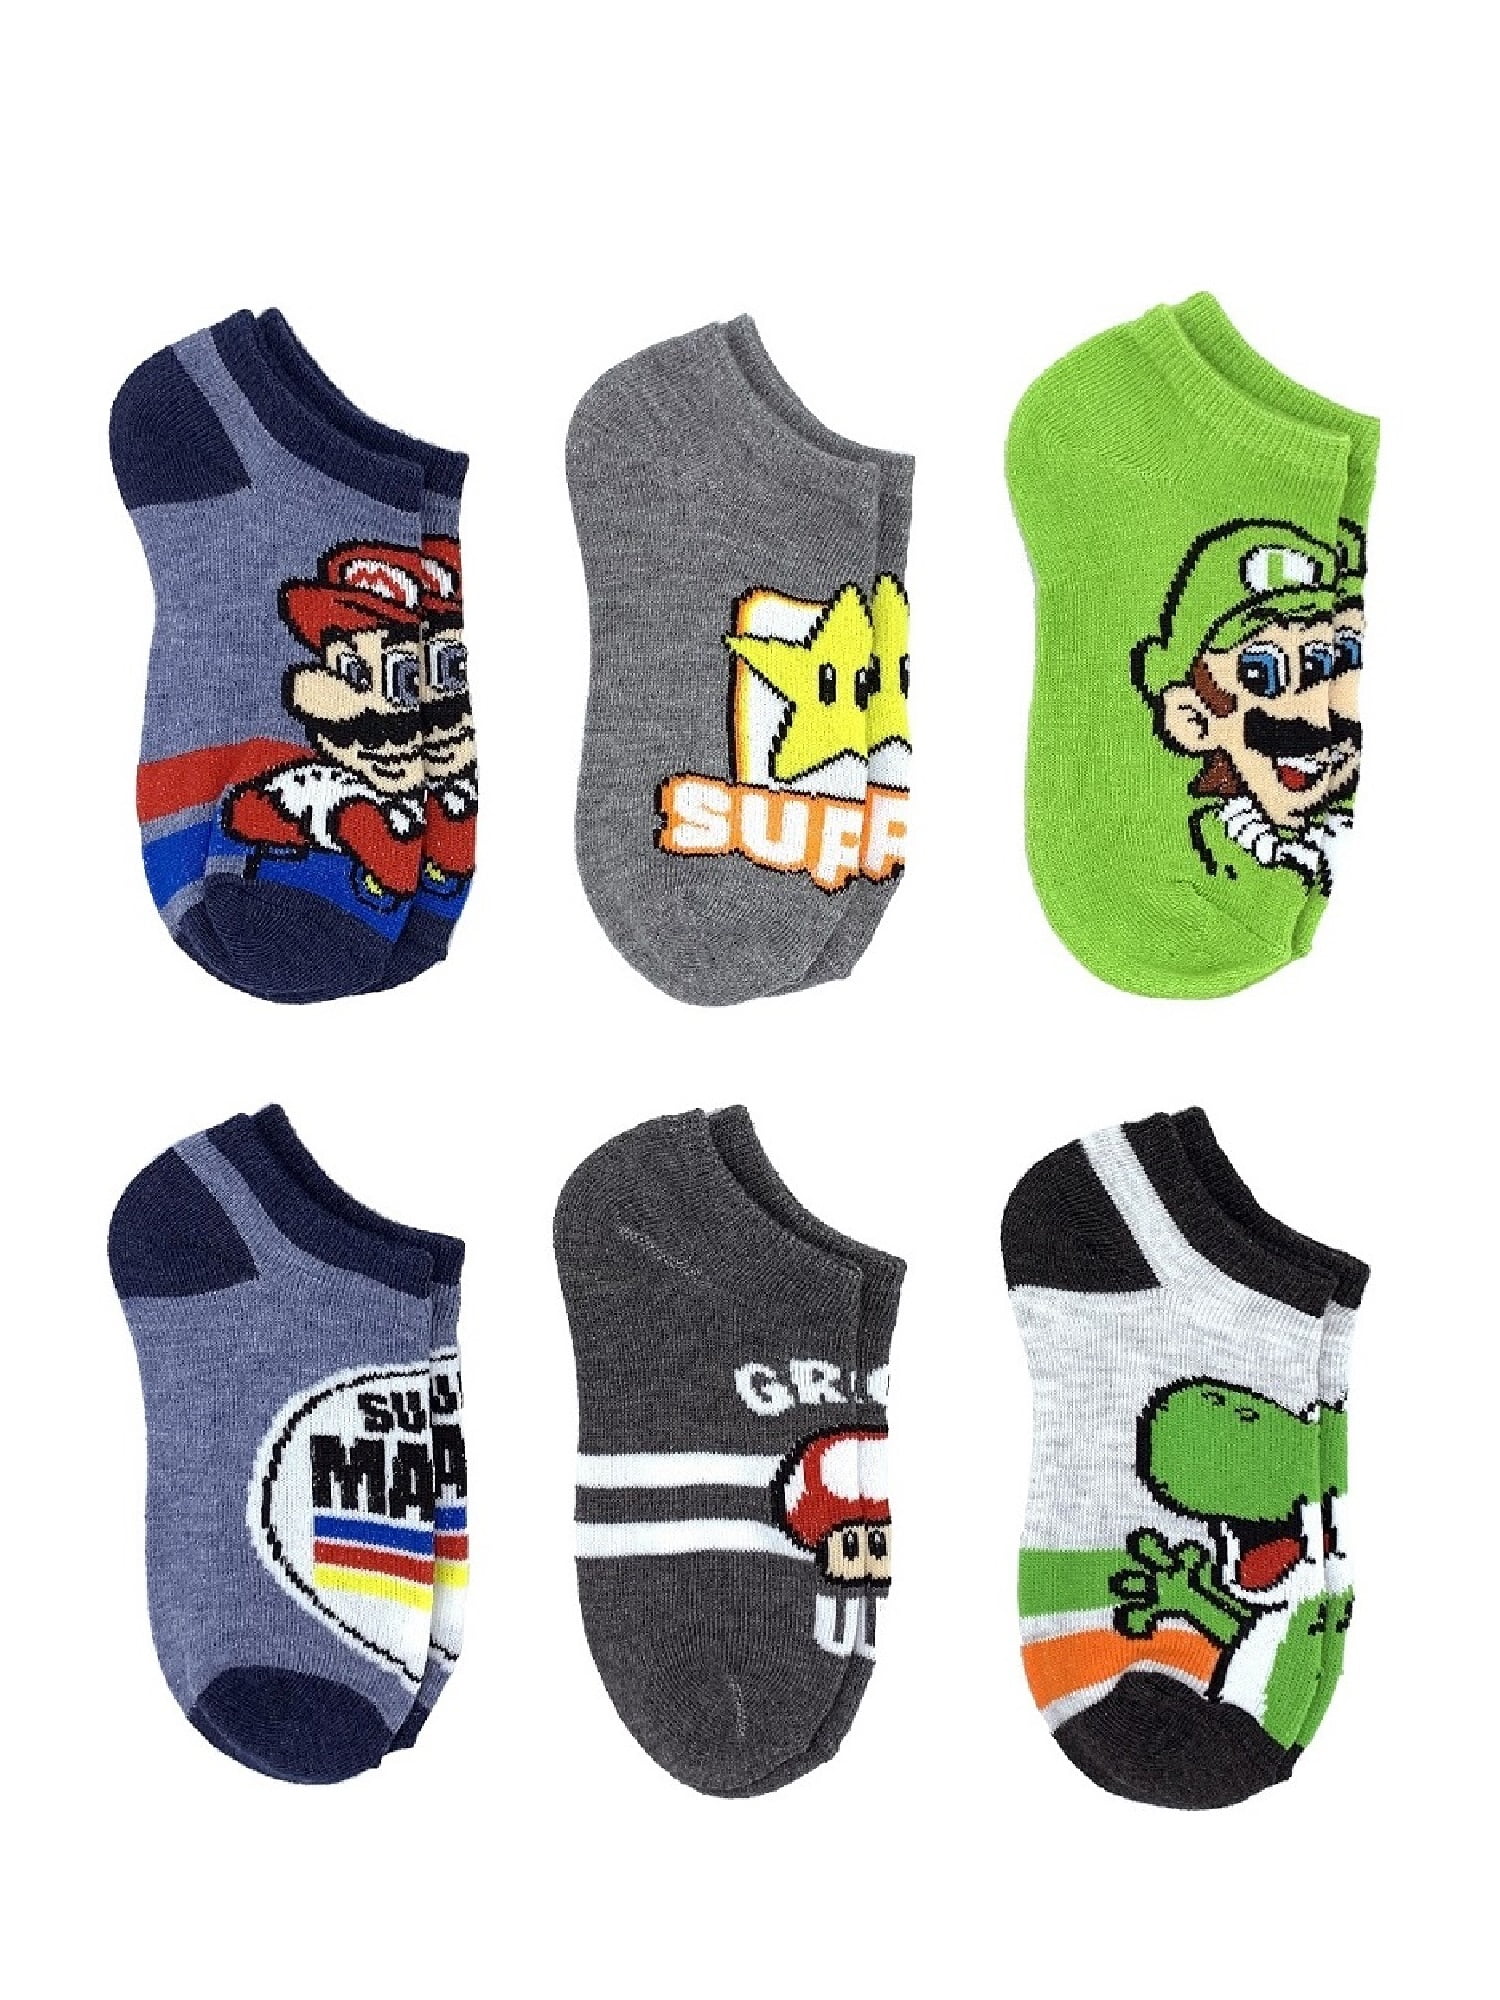 6 PAIRS BOYS WINTER THERMAL FANCY PATTERNED SOCKS SHOE SIZES 9-12 12.5-3.5 4-7 